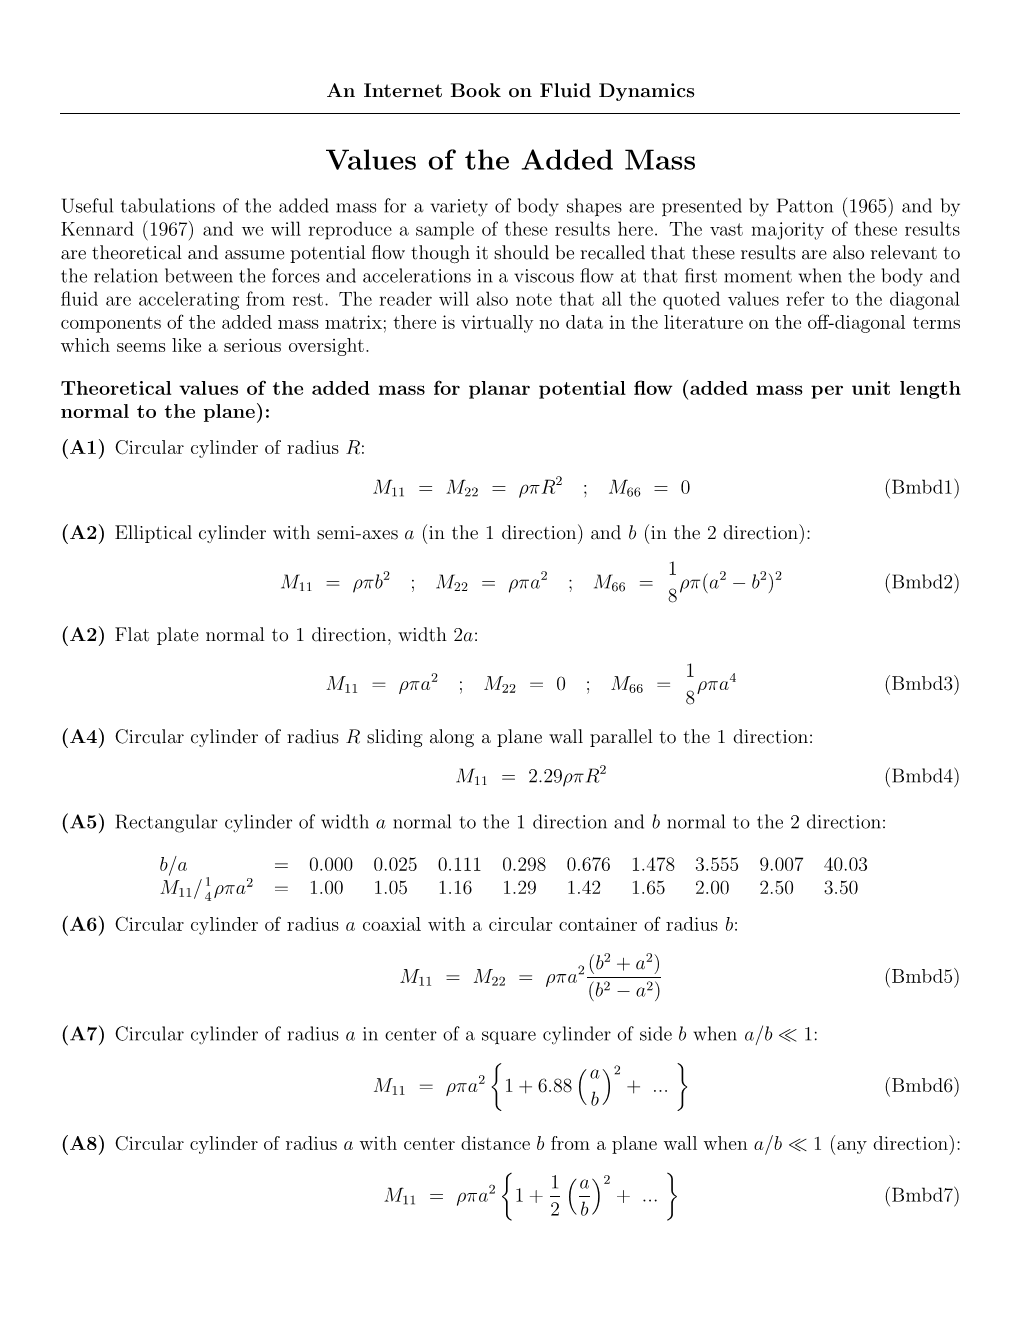 Values of the Added Mass